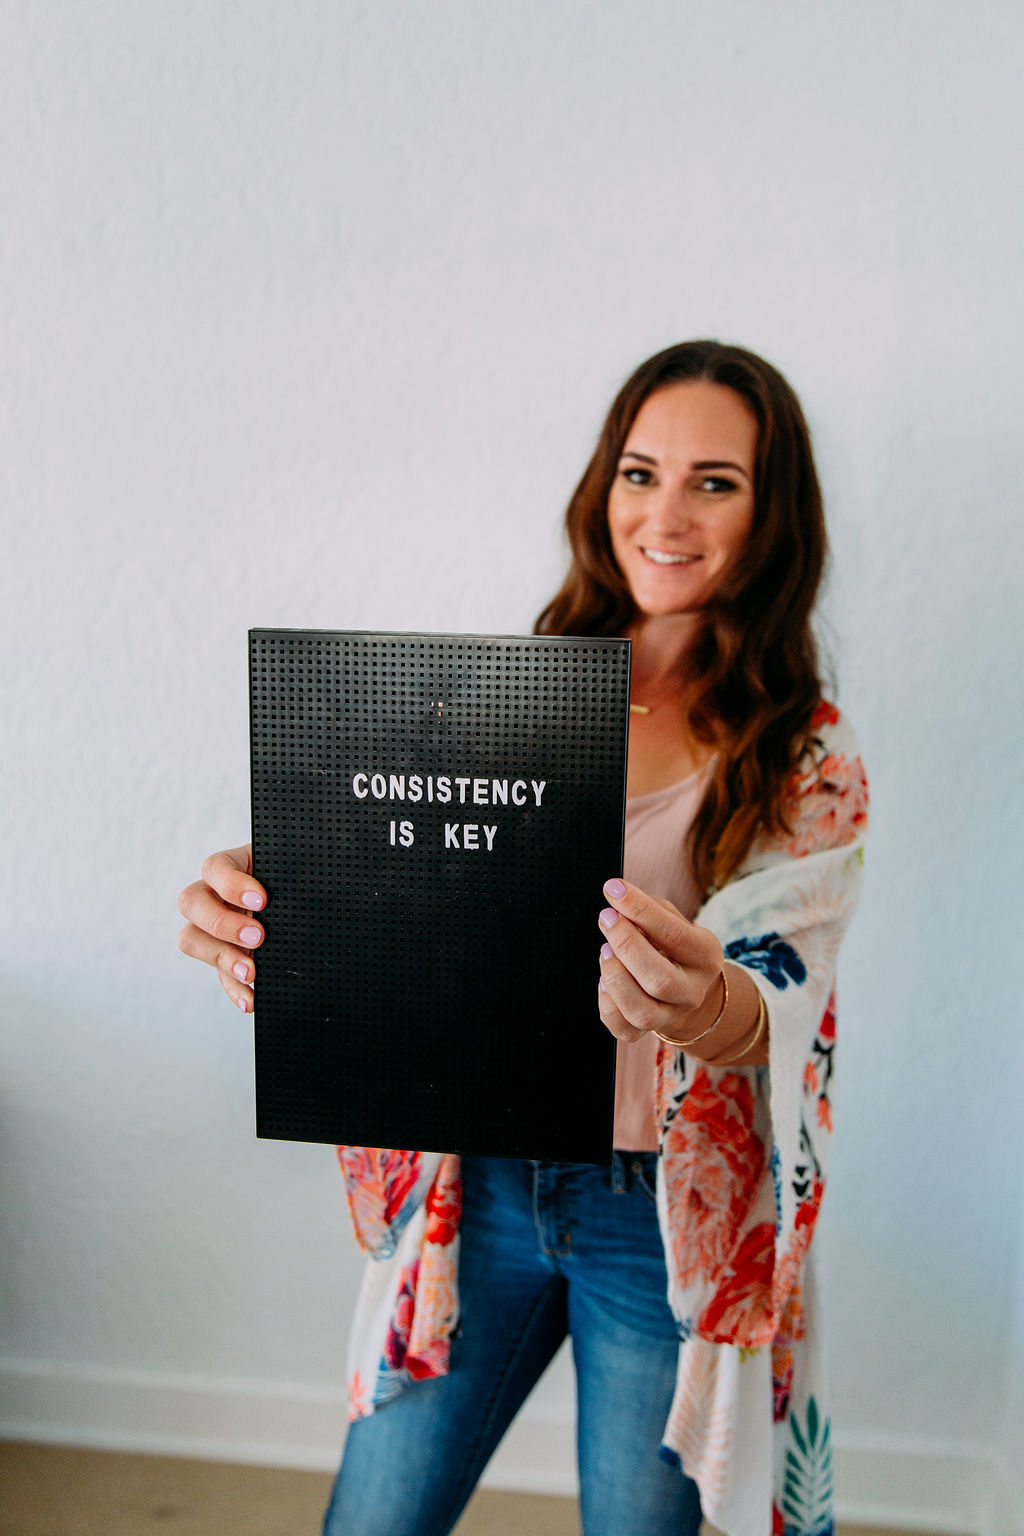 Sleep consultant holding a sign for consistency